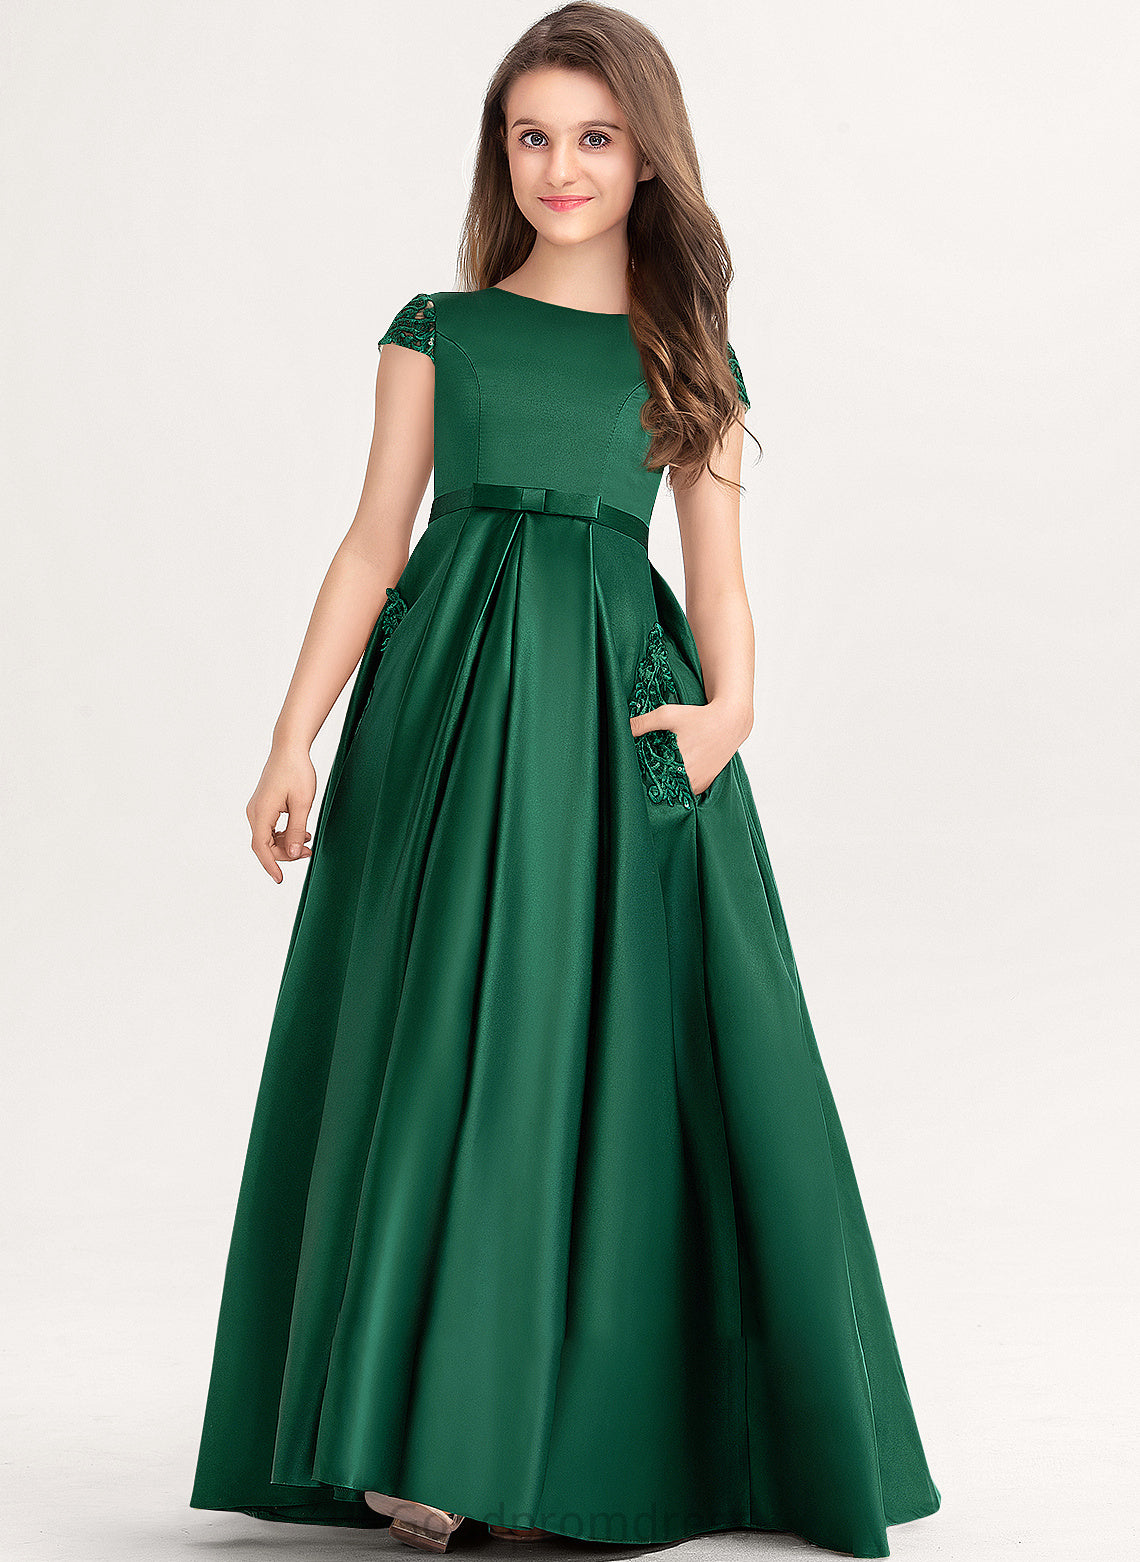 Neck Junior Bridesmaid Dresses Satin Bow(s) Alaina Scoop Ball-Gown/Princess Lace Pockets With Floor-Length